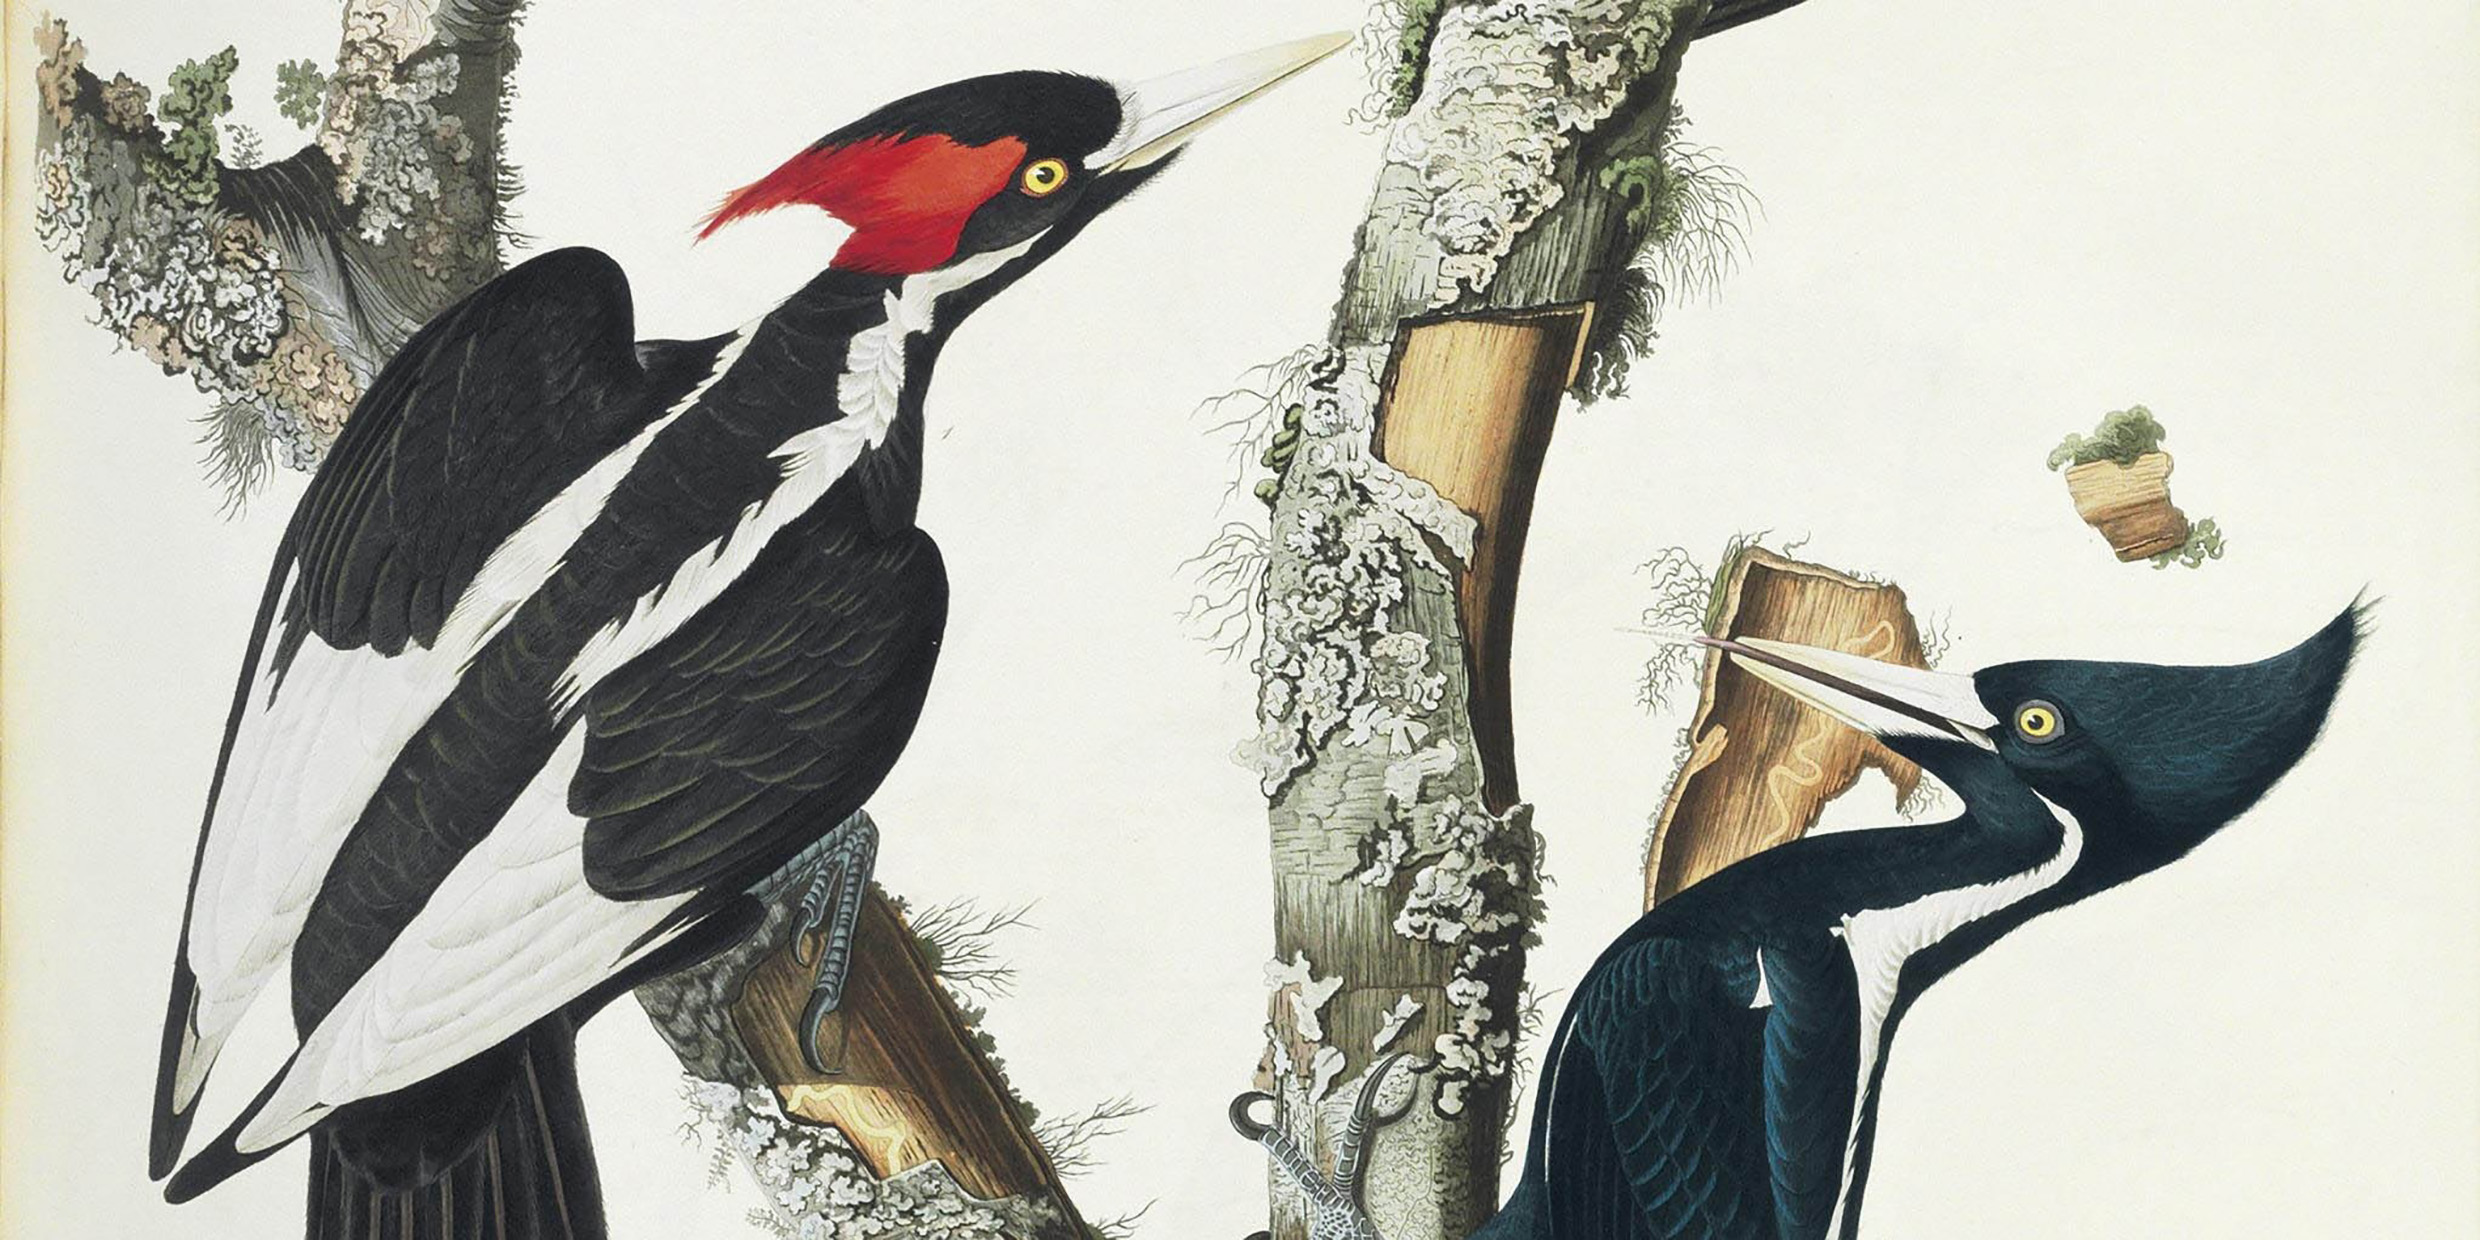 Painting of ivory-billed woodpeckers